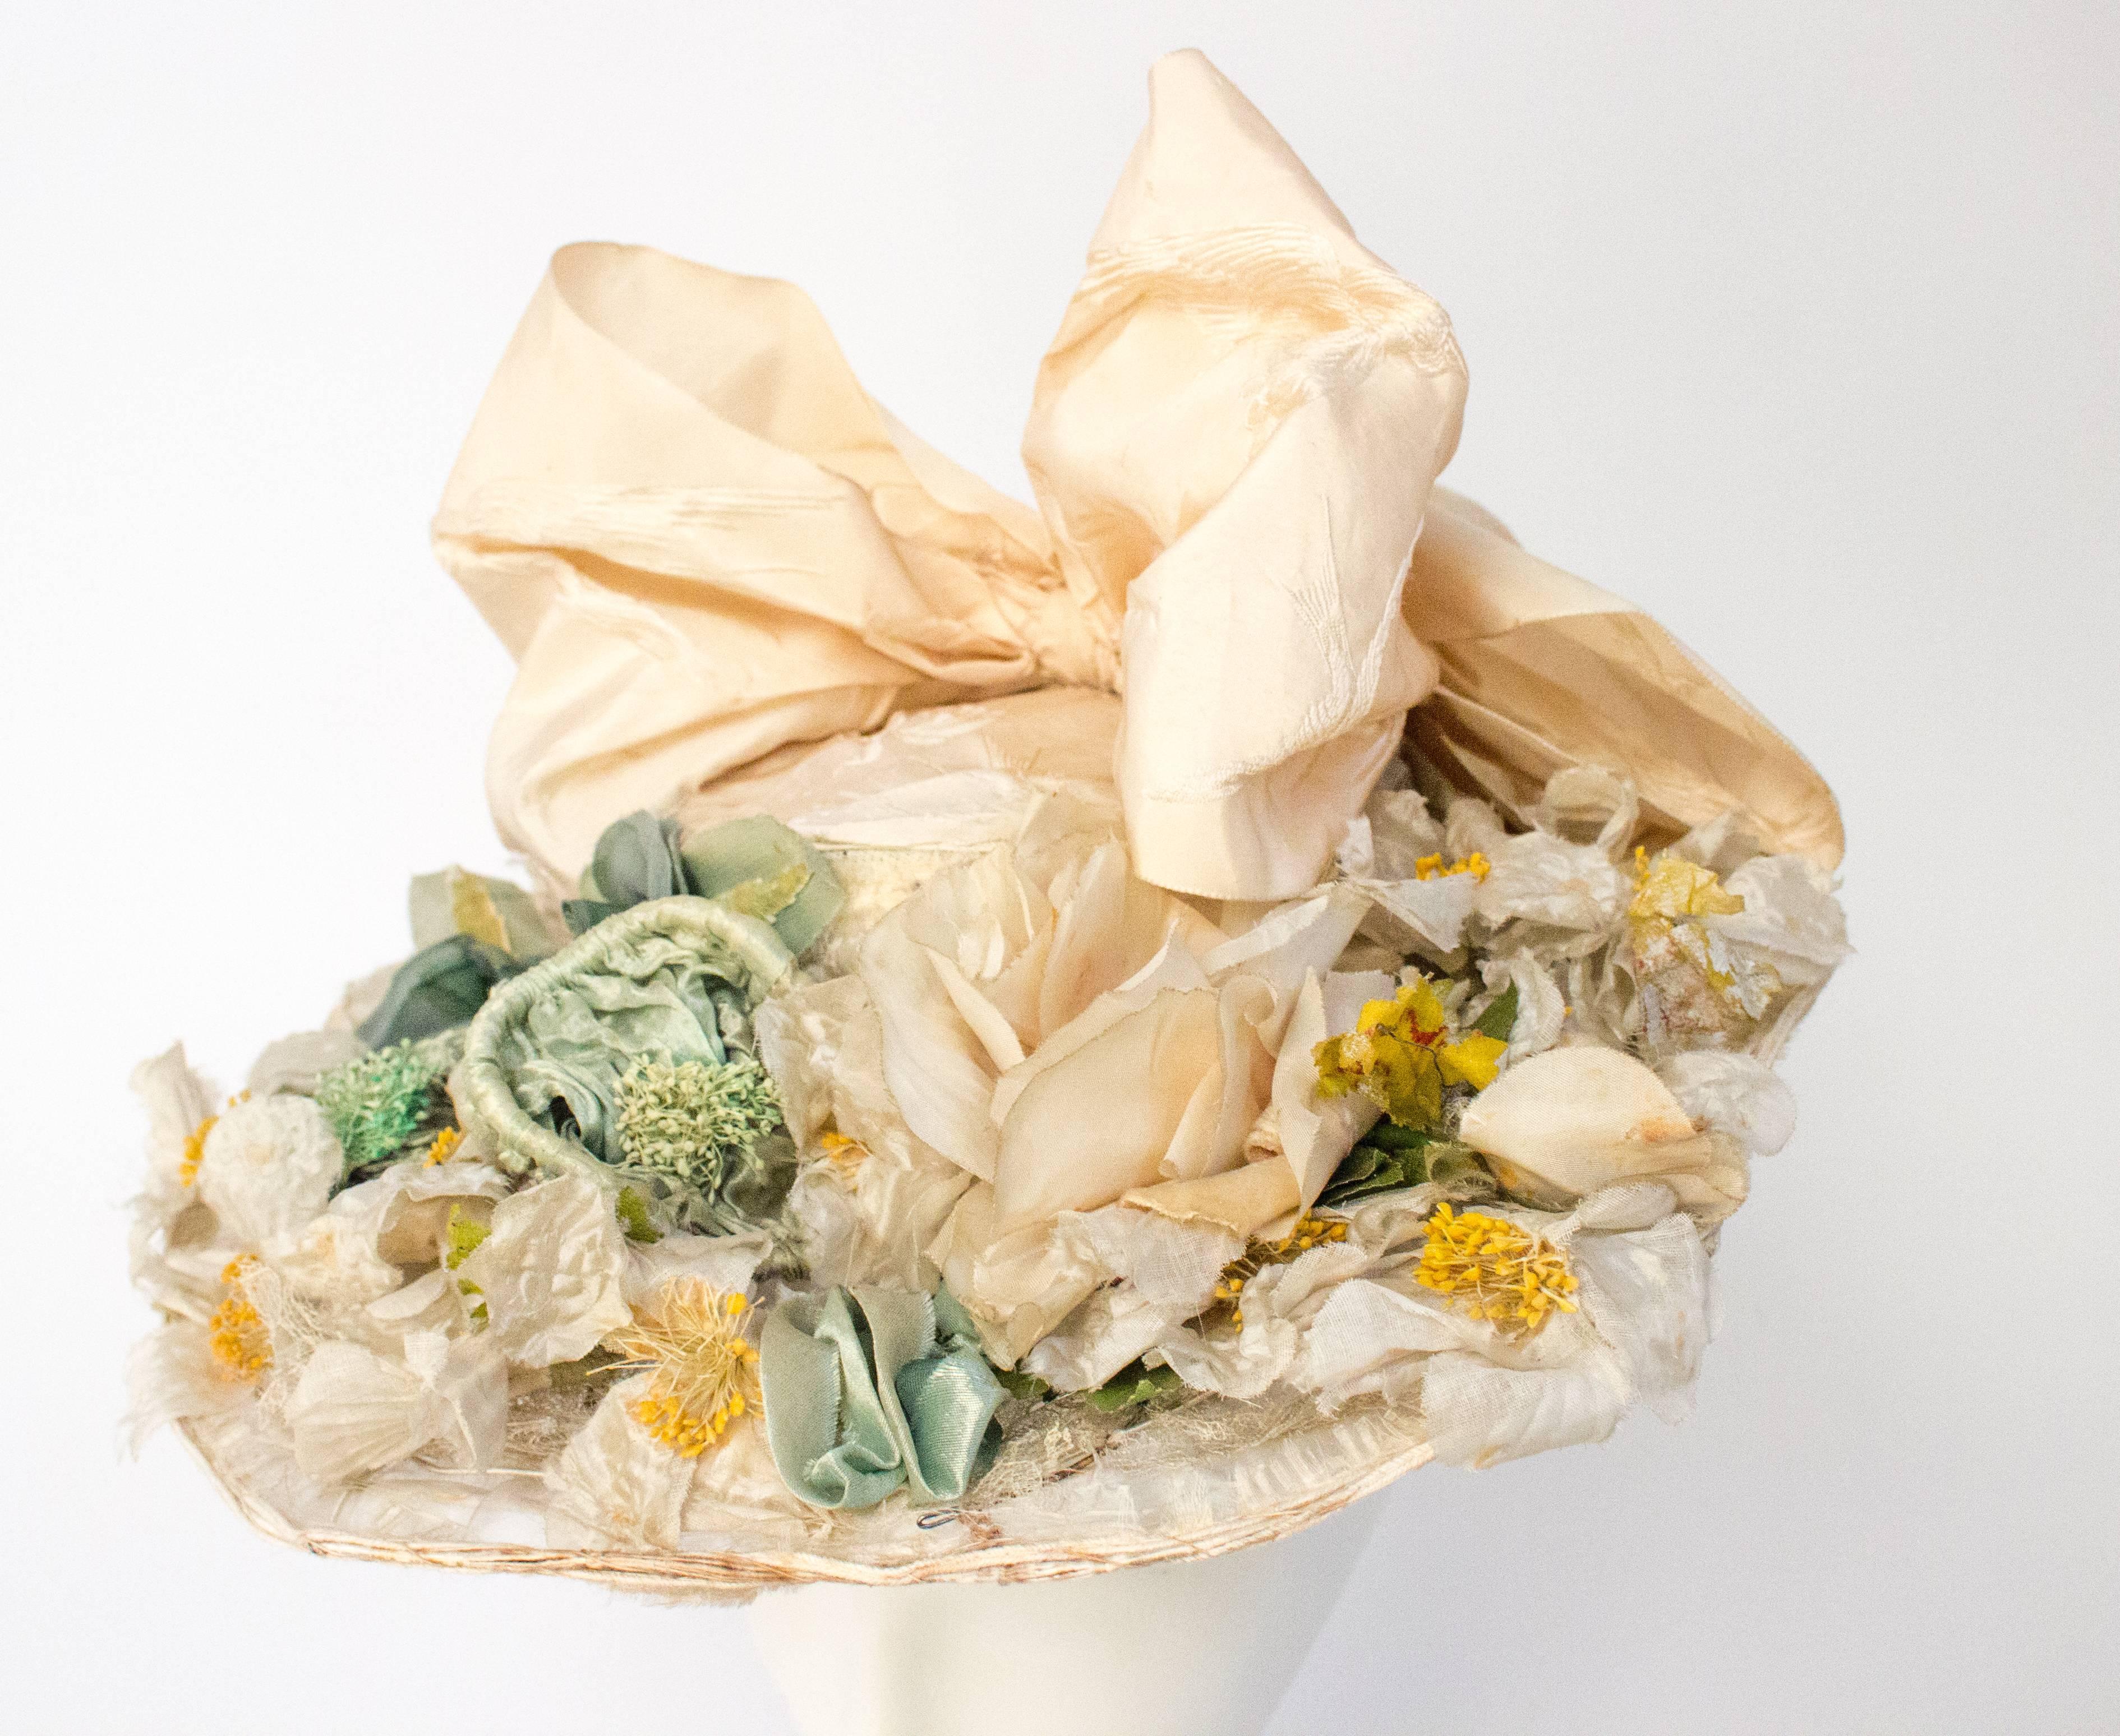 1910s Floral Edwardian Hat w/ Large Bow. Genuine white Edwardian hat w/ silk flowers and white jacquard bow with bird motif. 